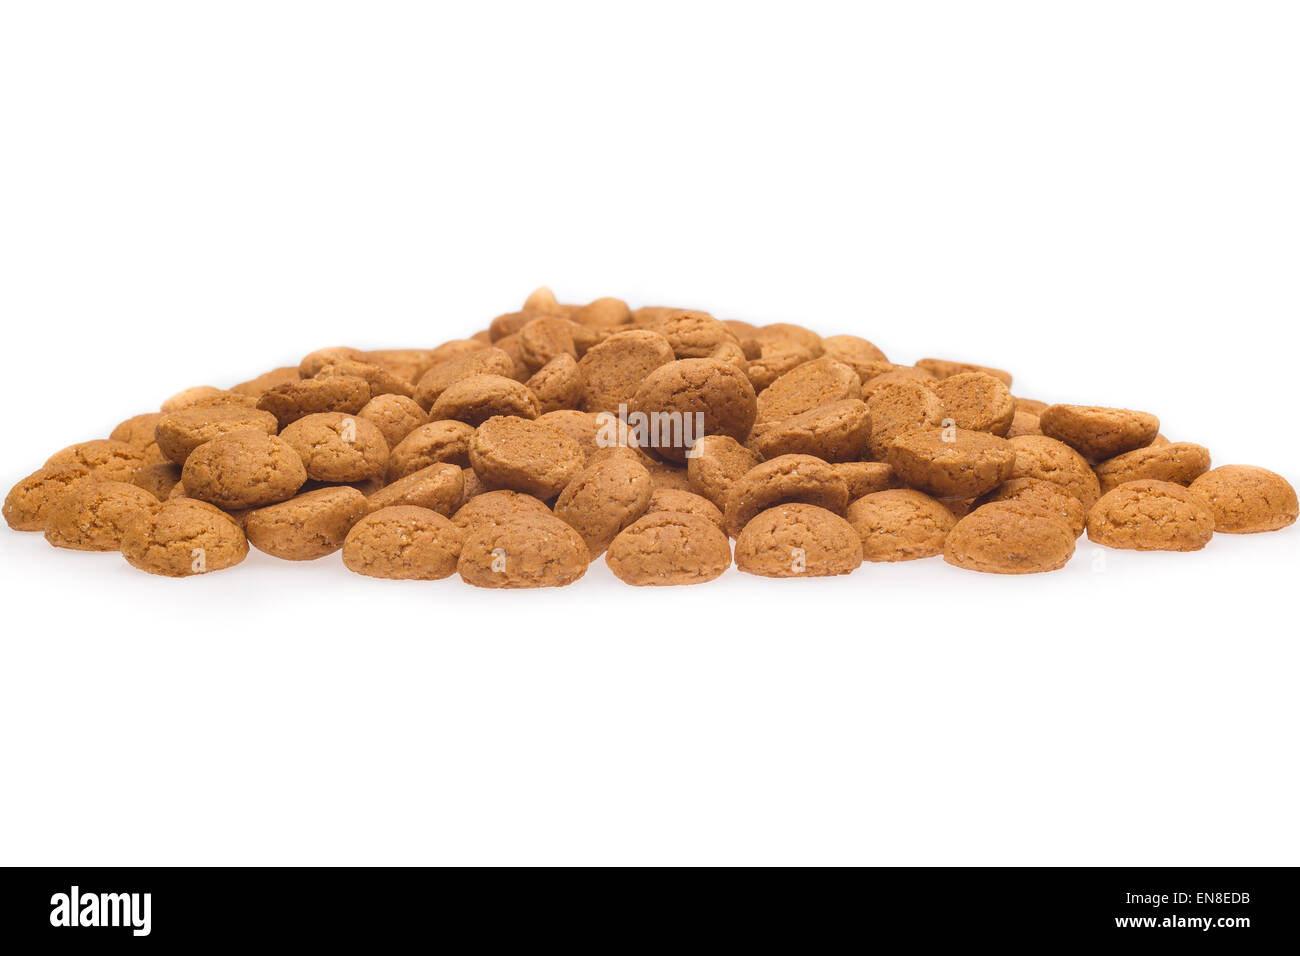 A lot of pepernoten, traditional dutch treat for Sinterklaas event on 5 december. Isolated on white background. Front view. Stock Photo